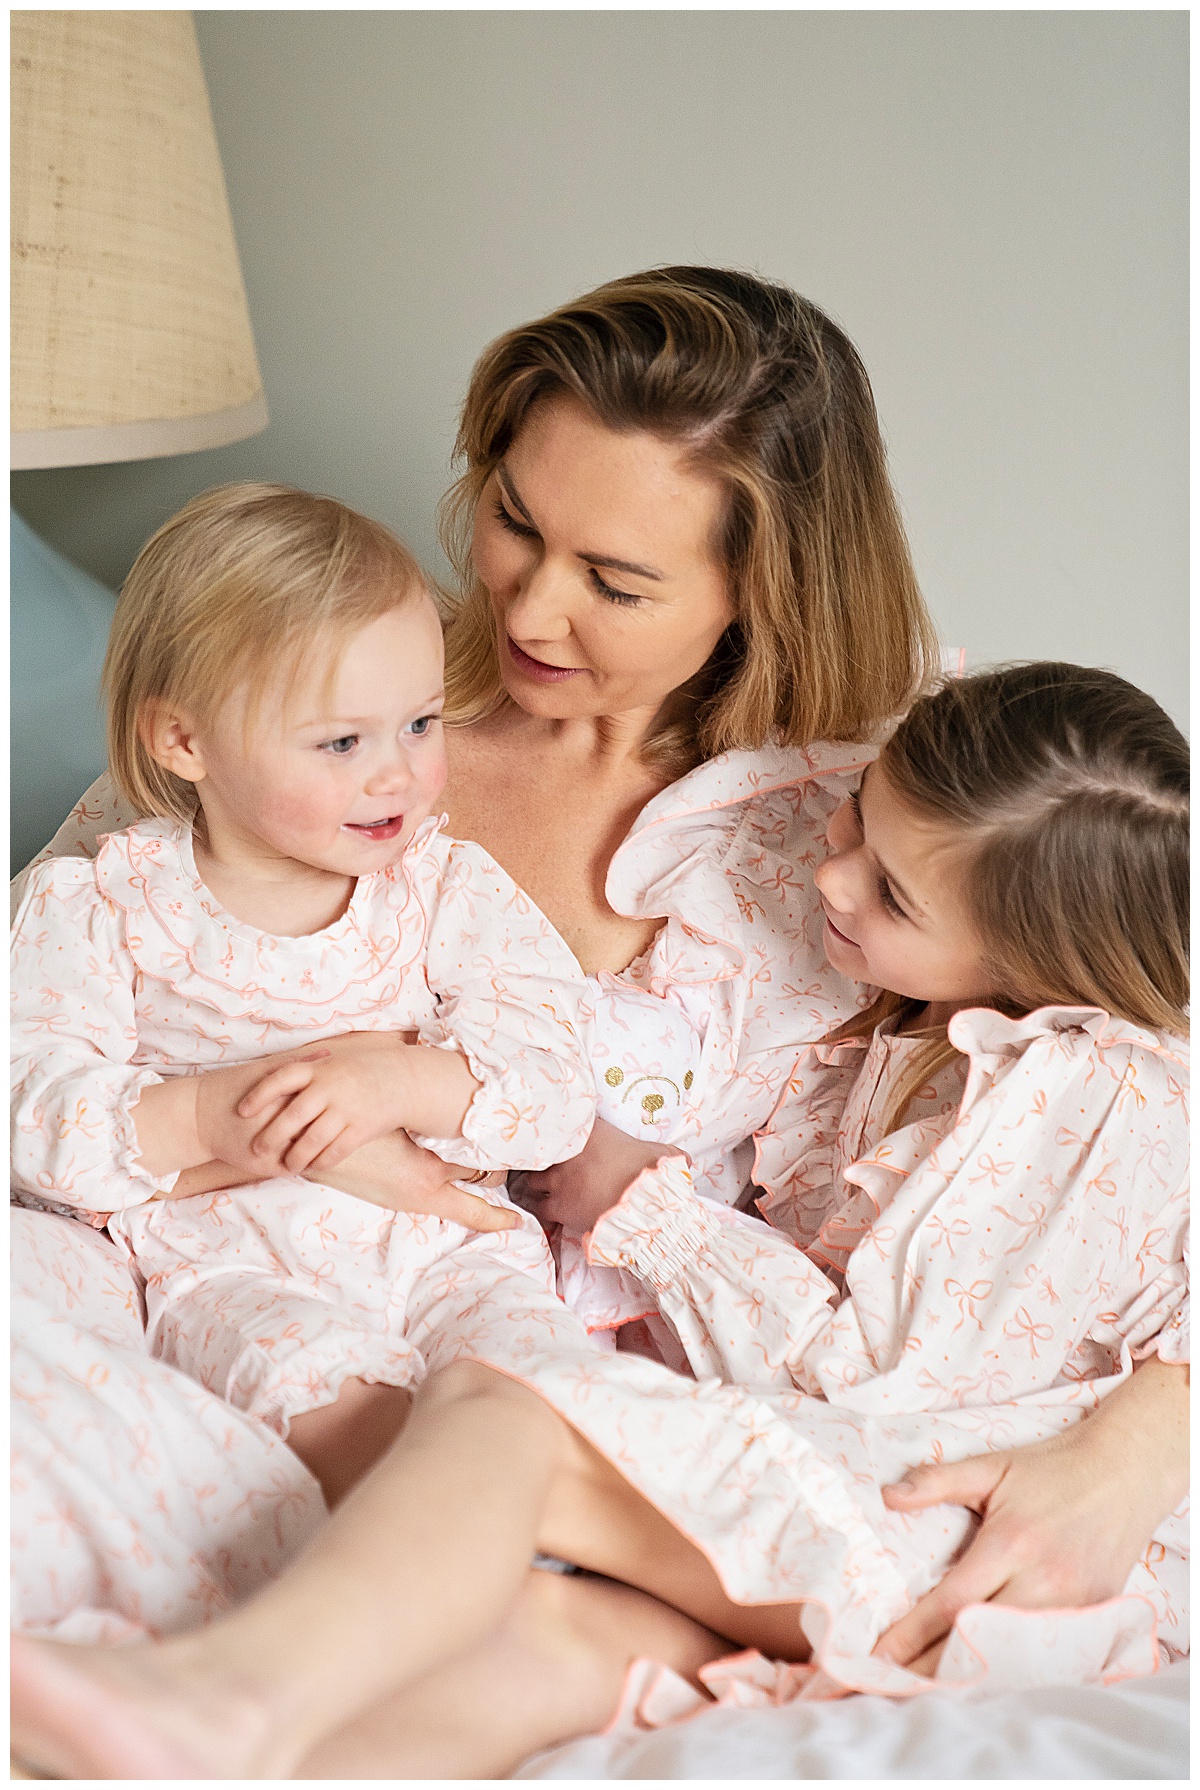 Lauren de Graad founder of Heidi Rose London with her two daughters wearing matching mother and me nightwear.
